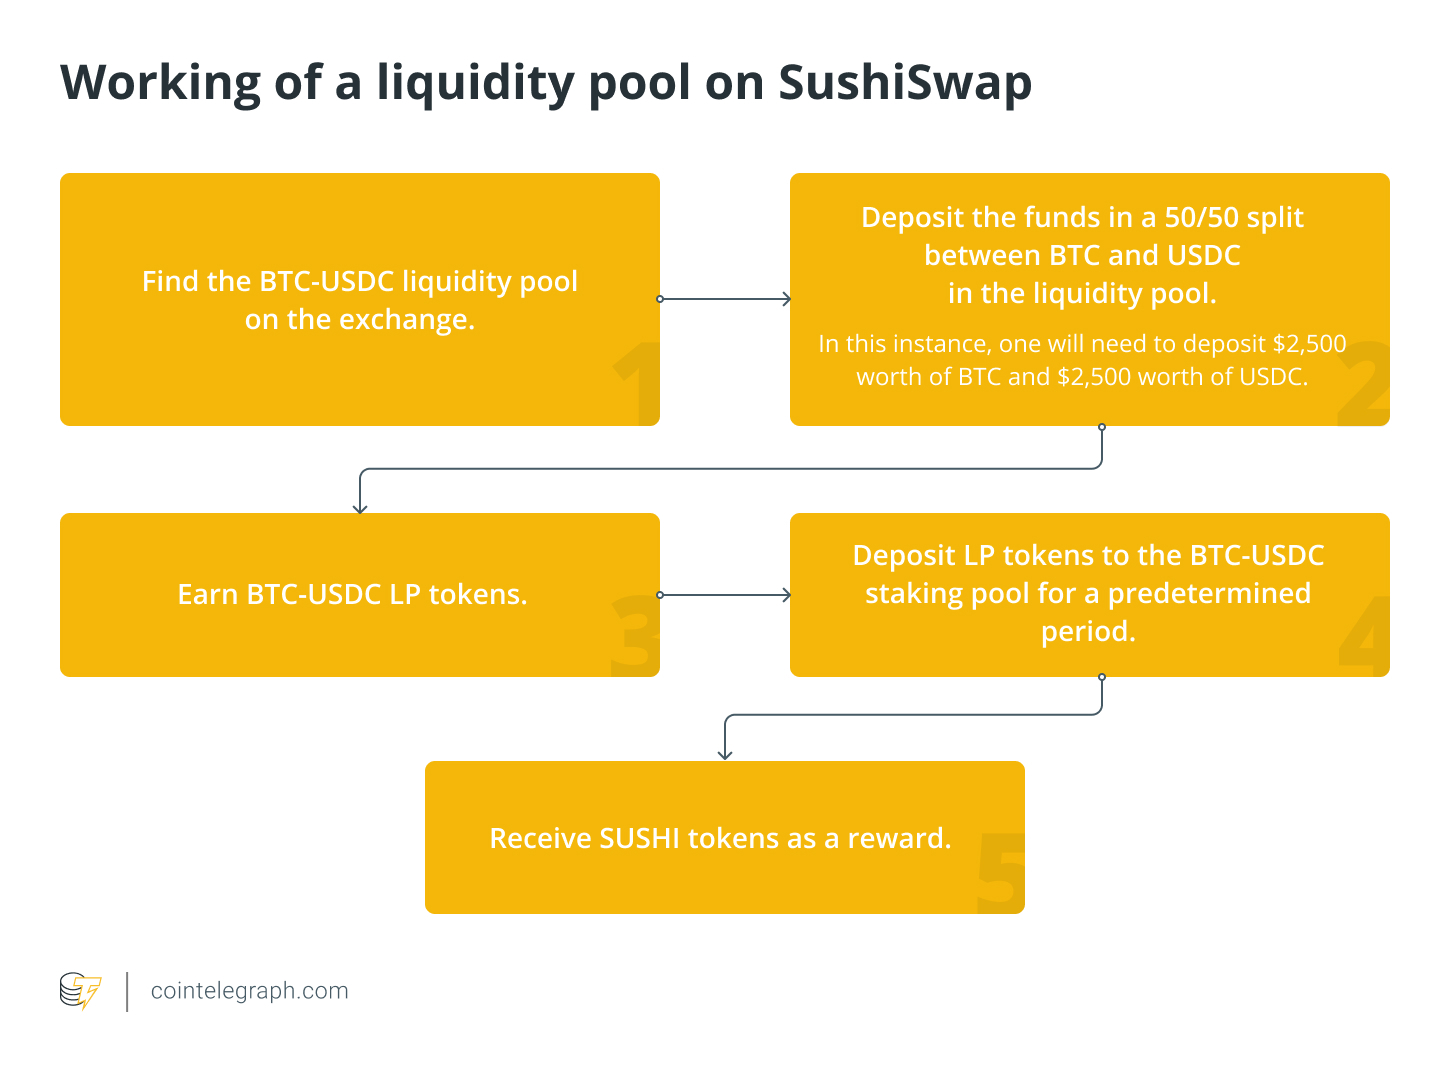 Working of a liquidity pool on SushiSwap